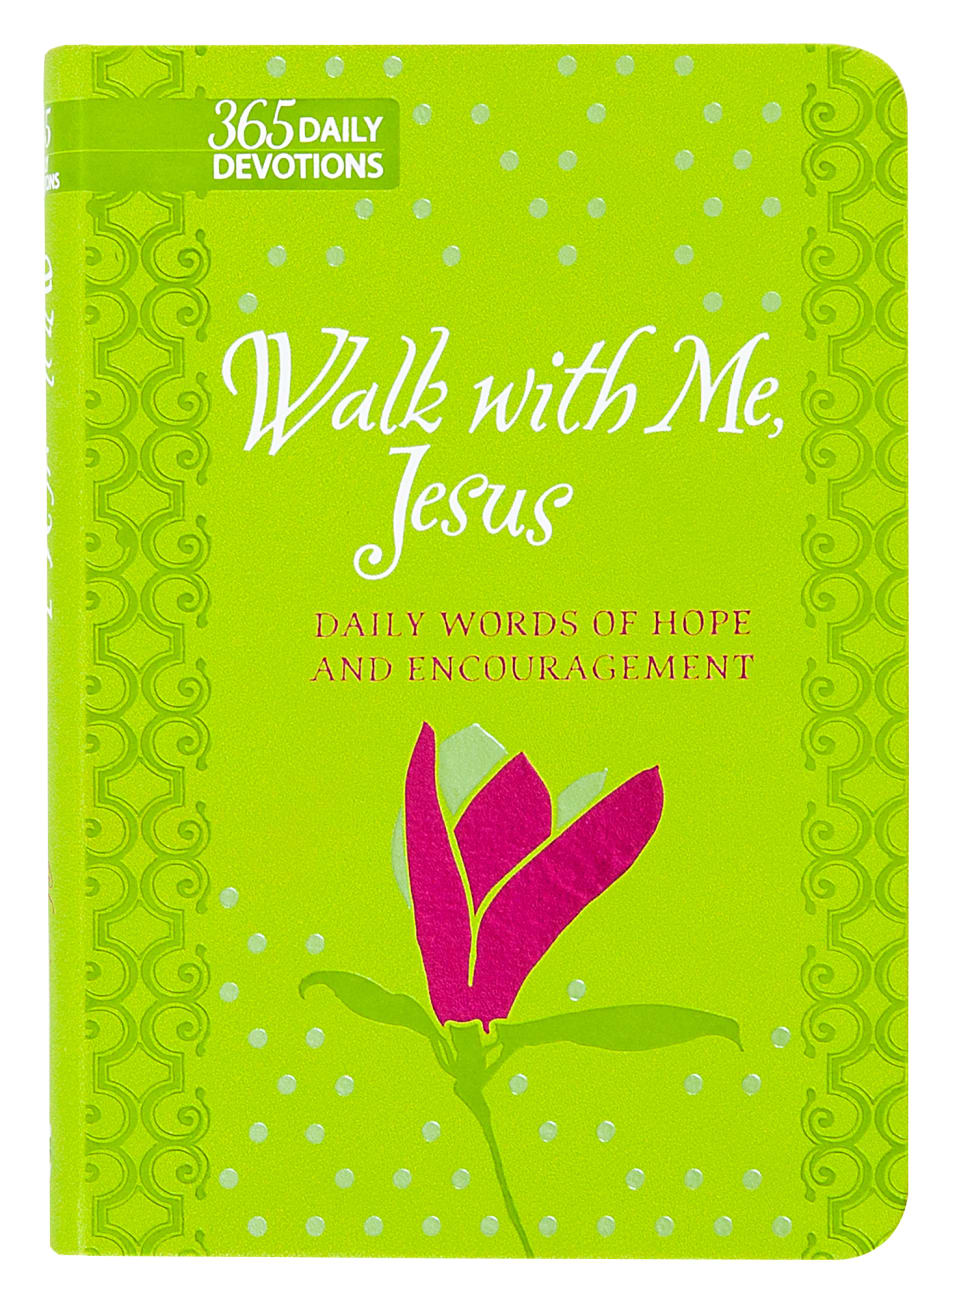 Walk With Me, Jesus: Daily Words of Hope and Encouragement (Gift Edition) Imitation Leather